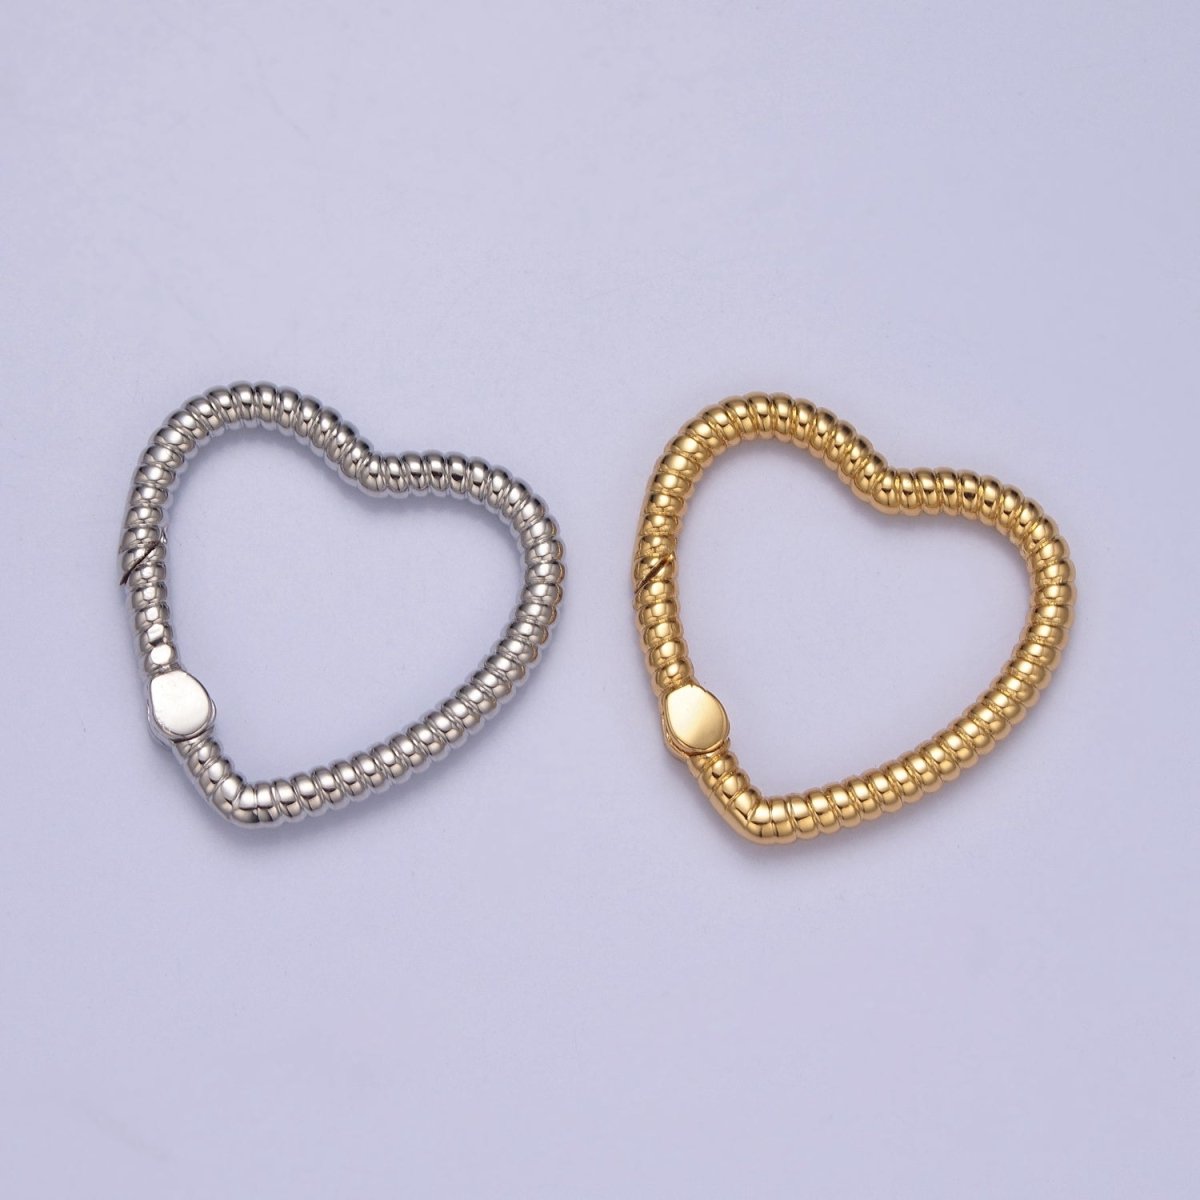 Dainty Gold Spring Heart Gate Ring, Push Gate Clasp Charm Holder 14K Gold Filled Clasp for Charm Holder Connector L-725 L-726 - DLUXCA